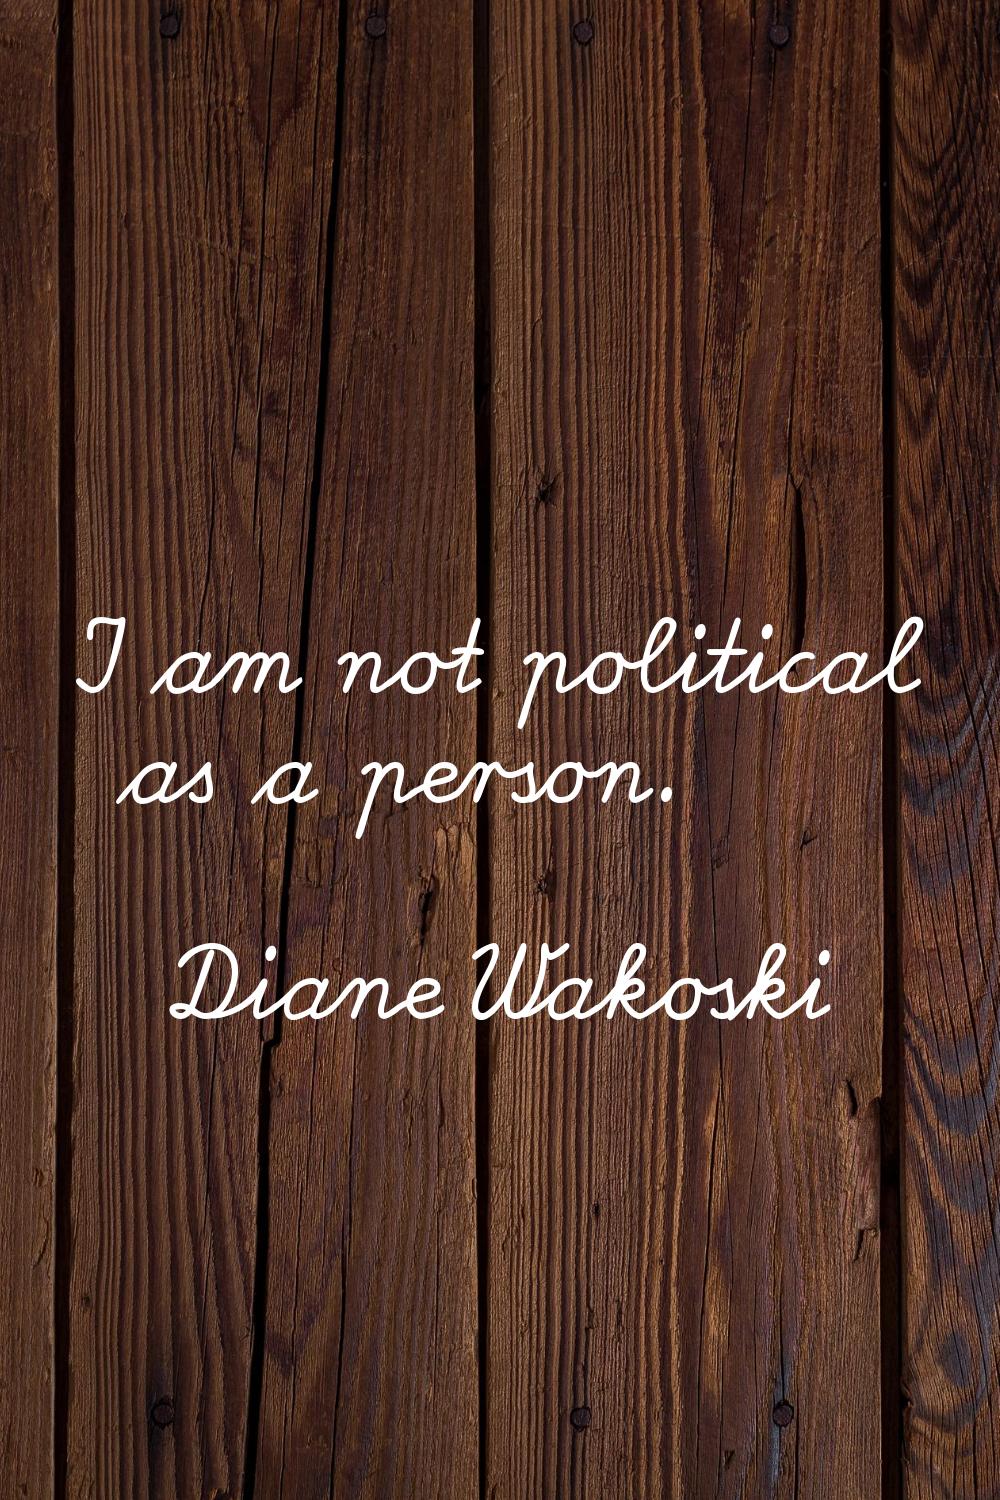 I am not political as a person.